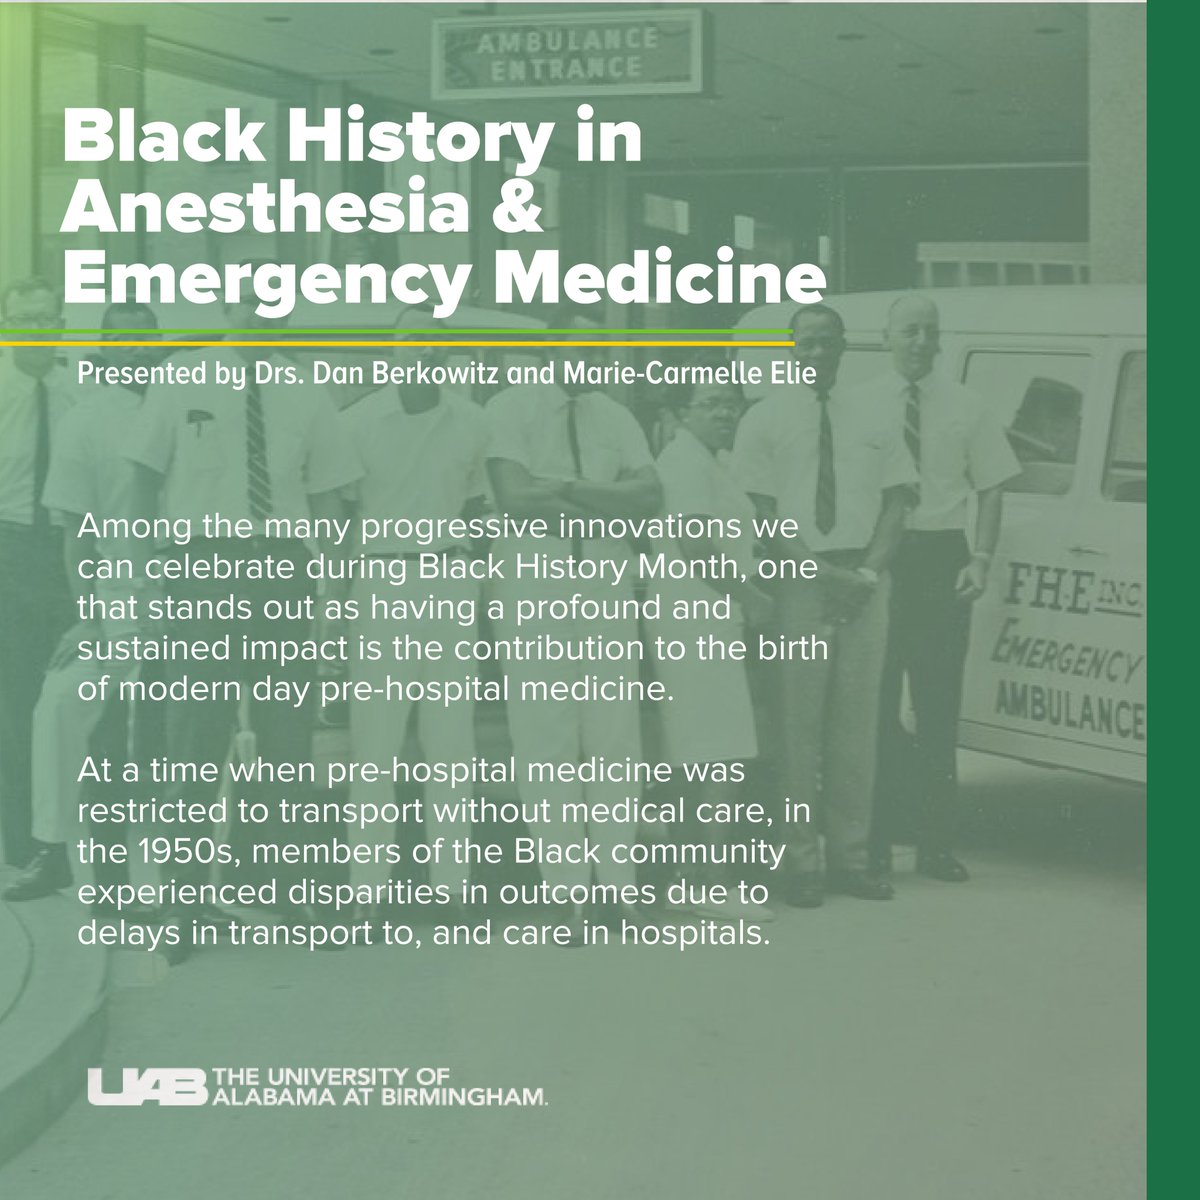 Stay tuned over the next 3 days as Emergency Medicine and @UAB_Anesthesia department Chairs @CarmelleElieMD and @dan_bch tell the story of Freedom House Ambulance Service-- an impactful tale of Black history & the history of pre-hospital care in America. #BlackHistoryMonth (1/4)